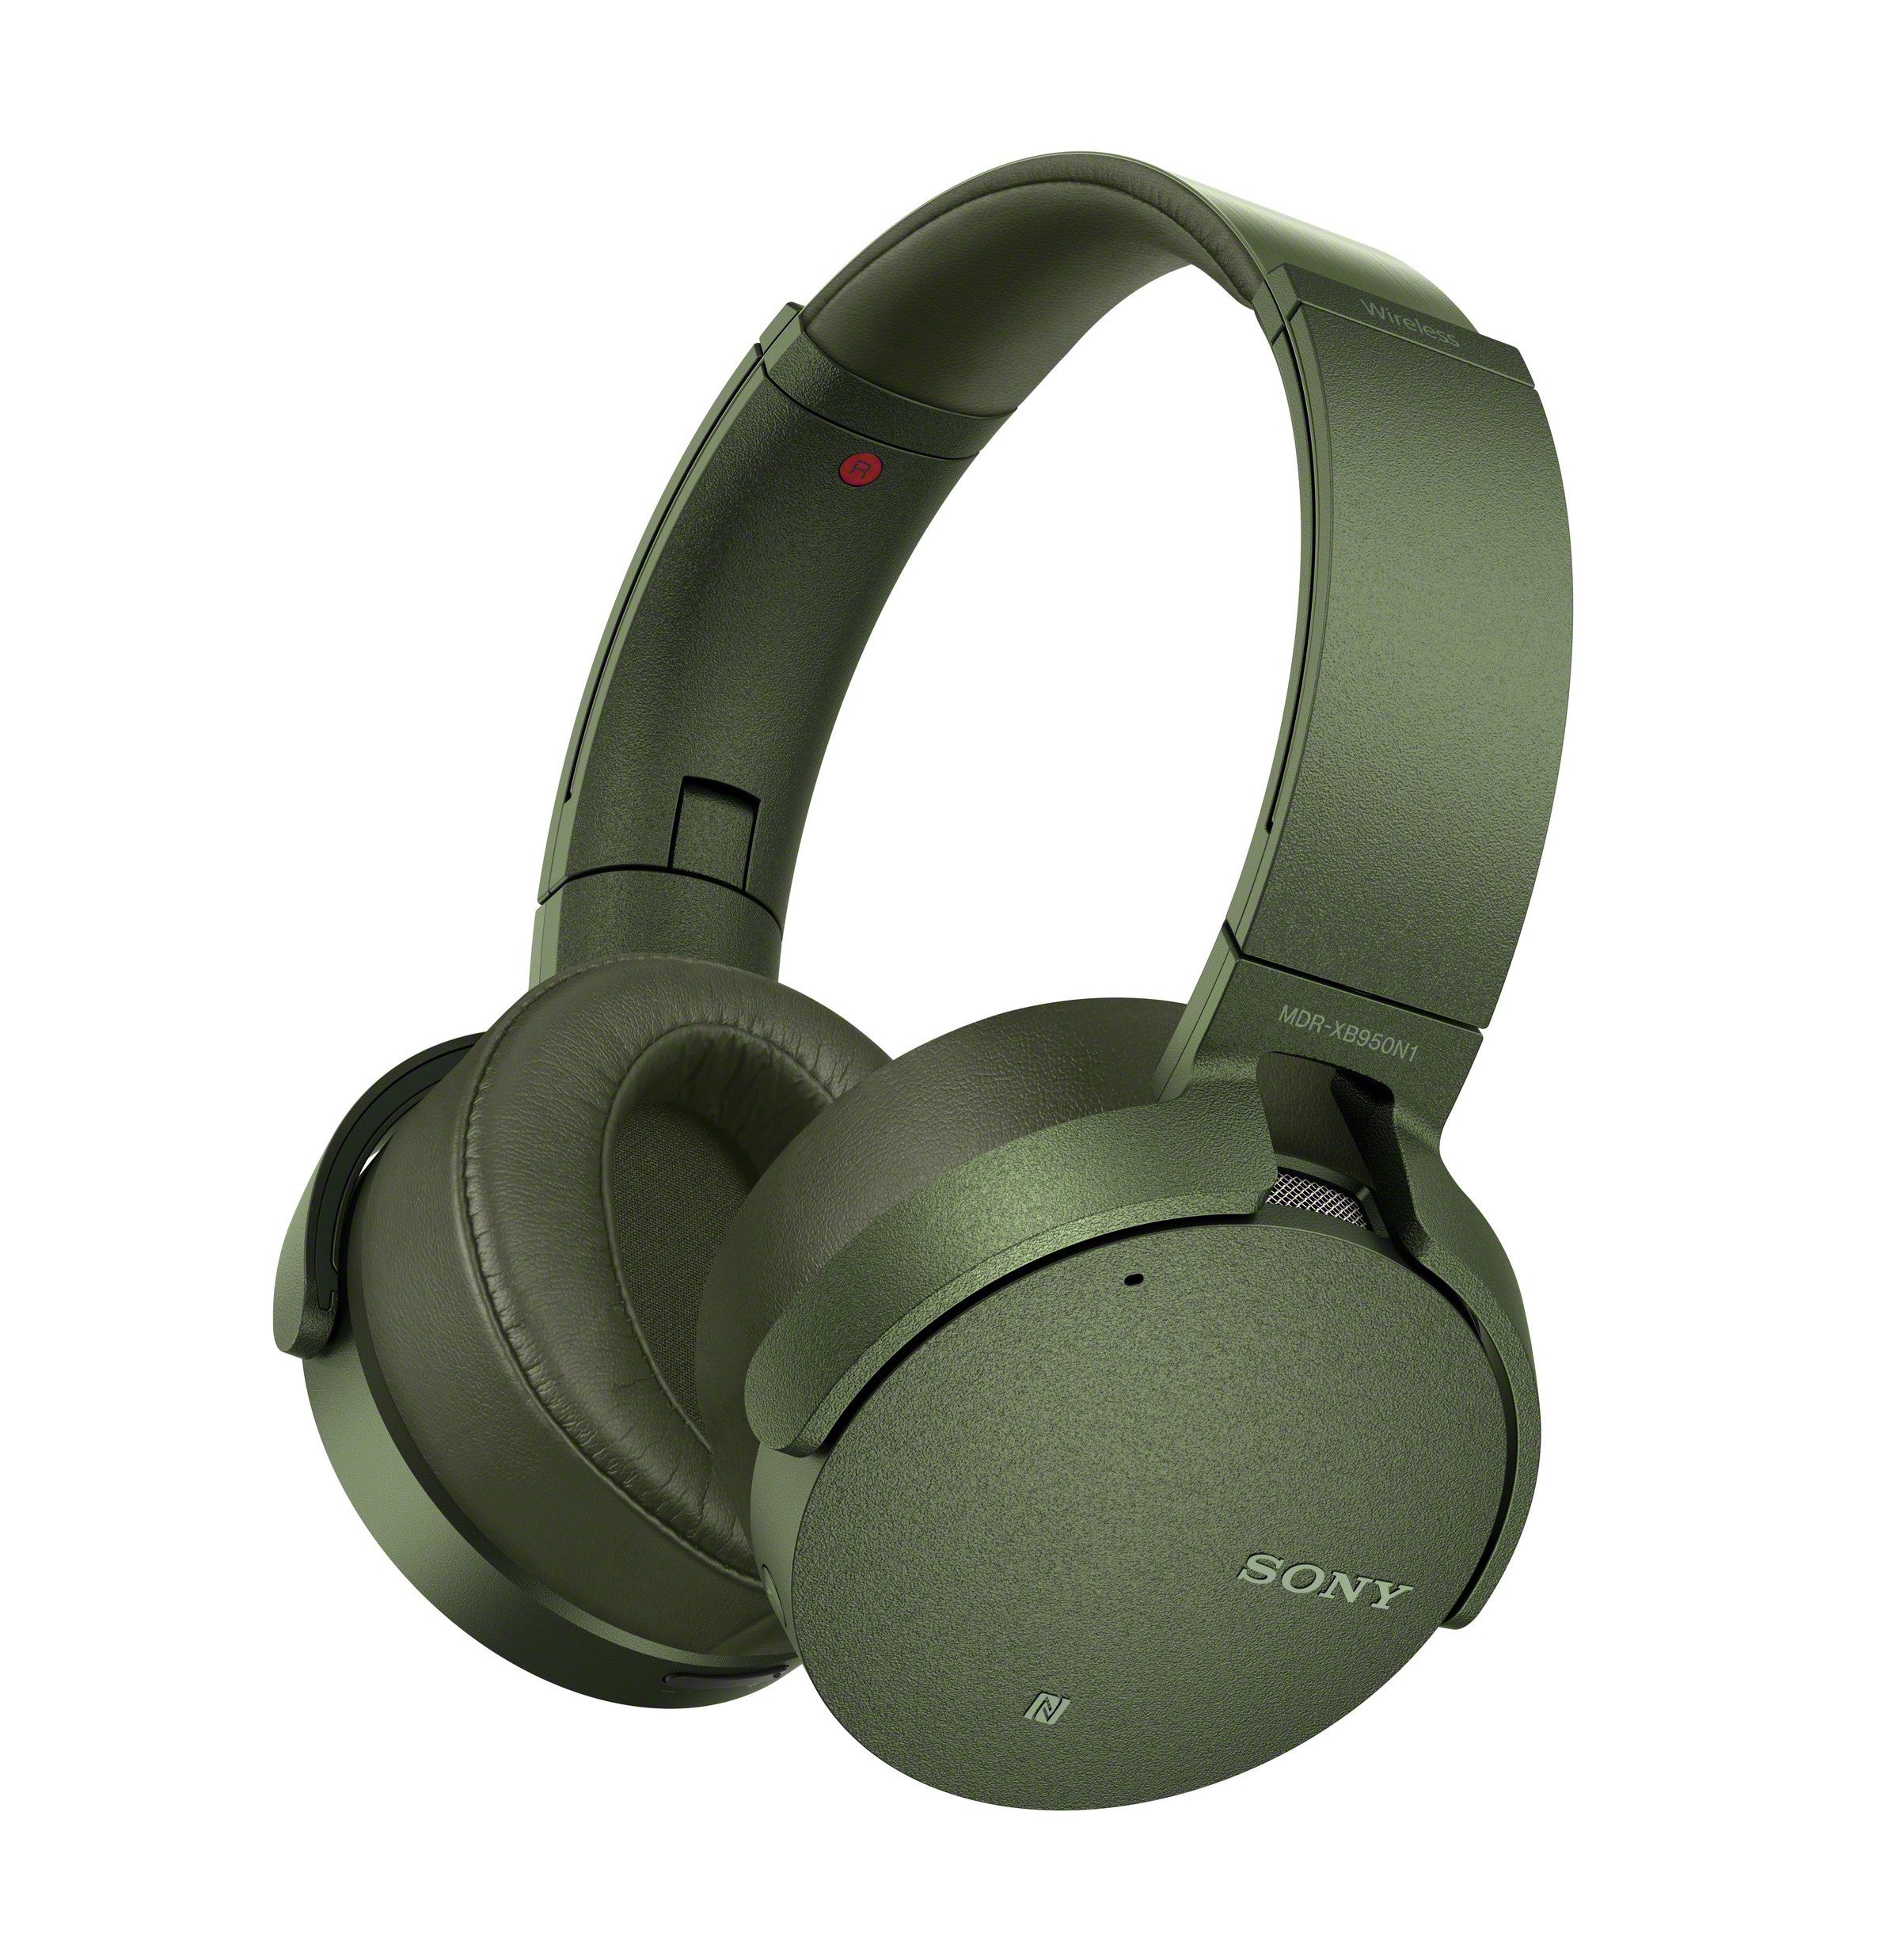 Sony MDR-XB950N1 Extra Bass with active noise cancellation - New Sony Extra Bass headphones and wireless speakers are announced at CES